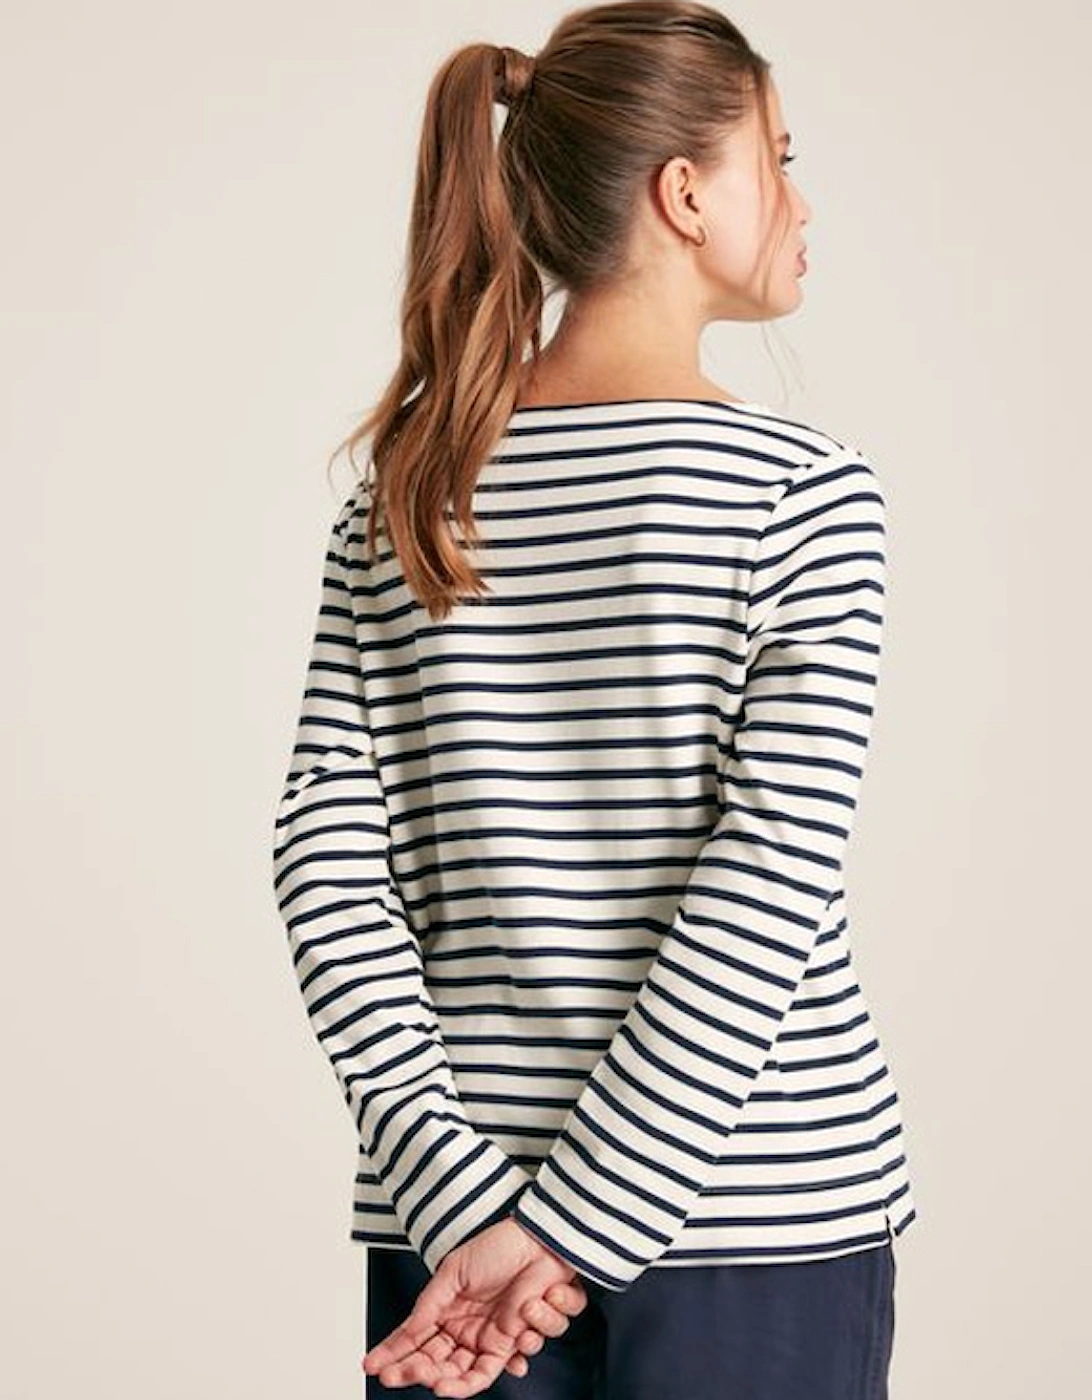 Women's New Harbour Relaxed Fit Boat Neck Breton Top Cream/Navy Stripe